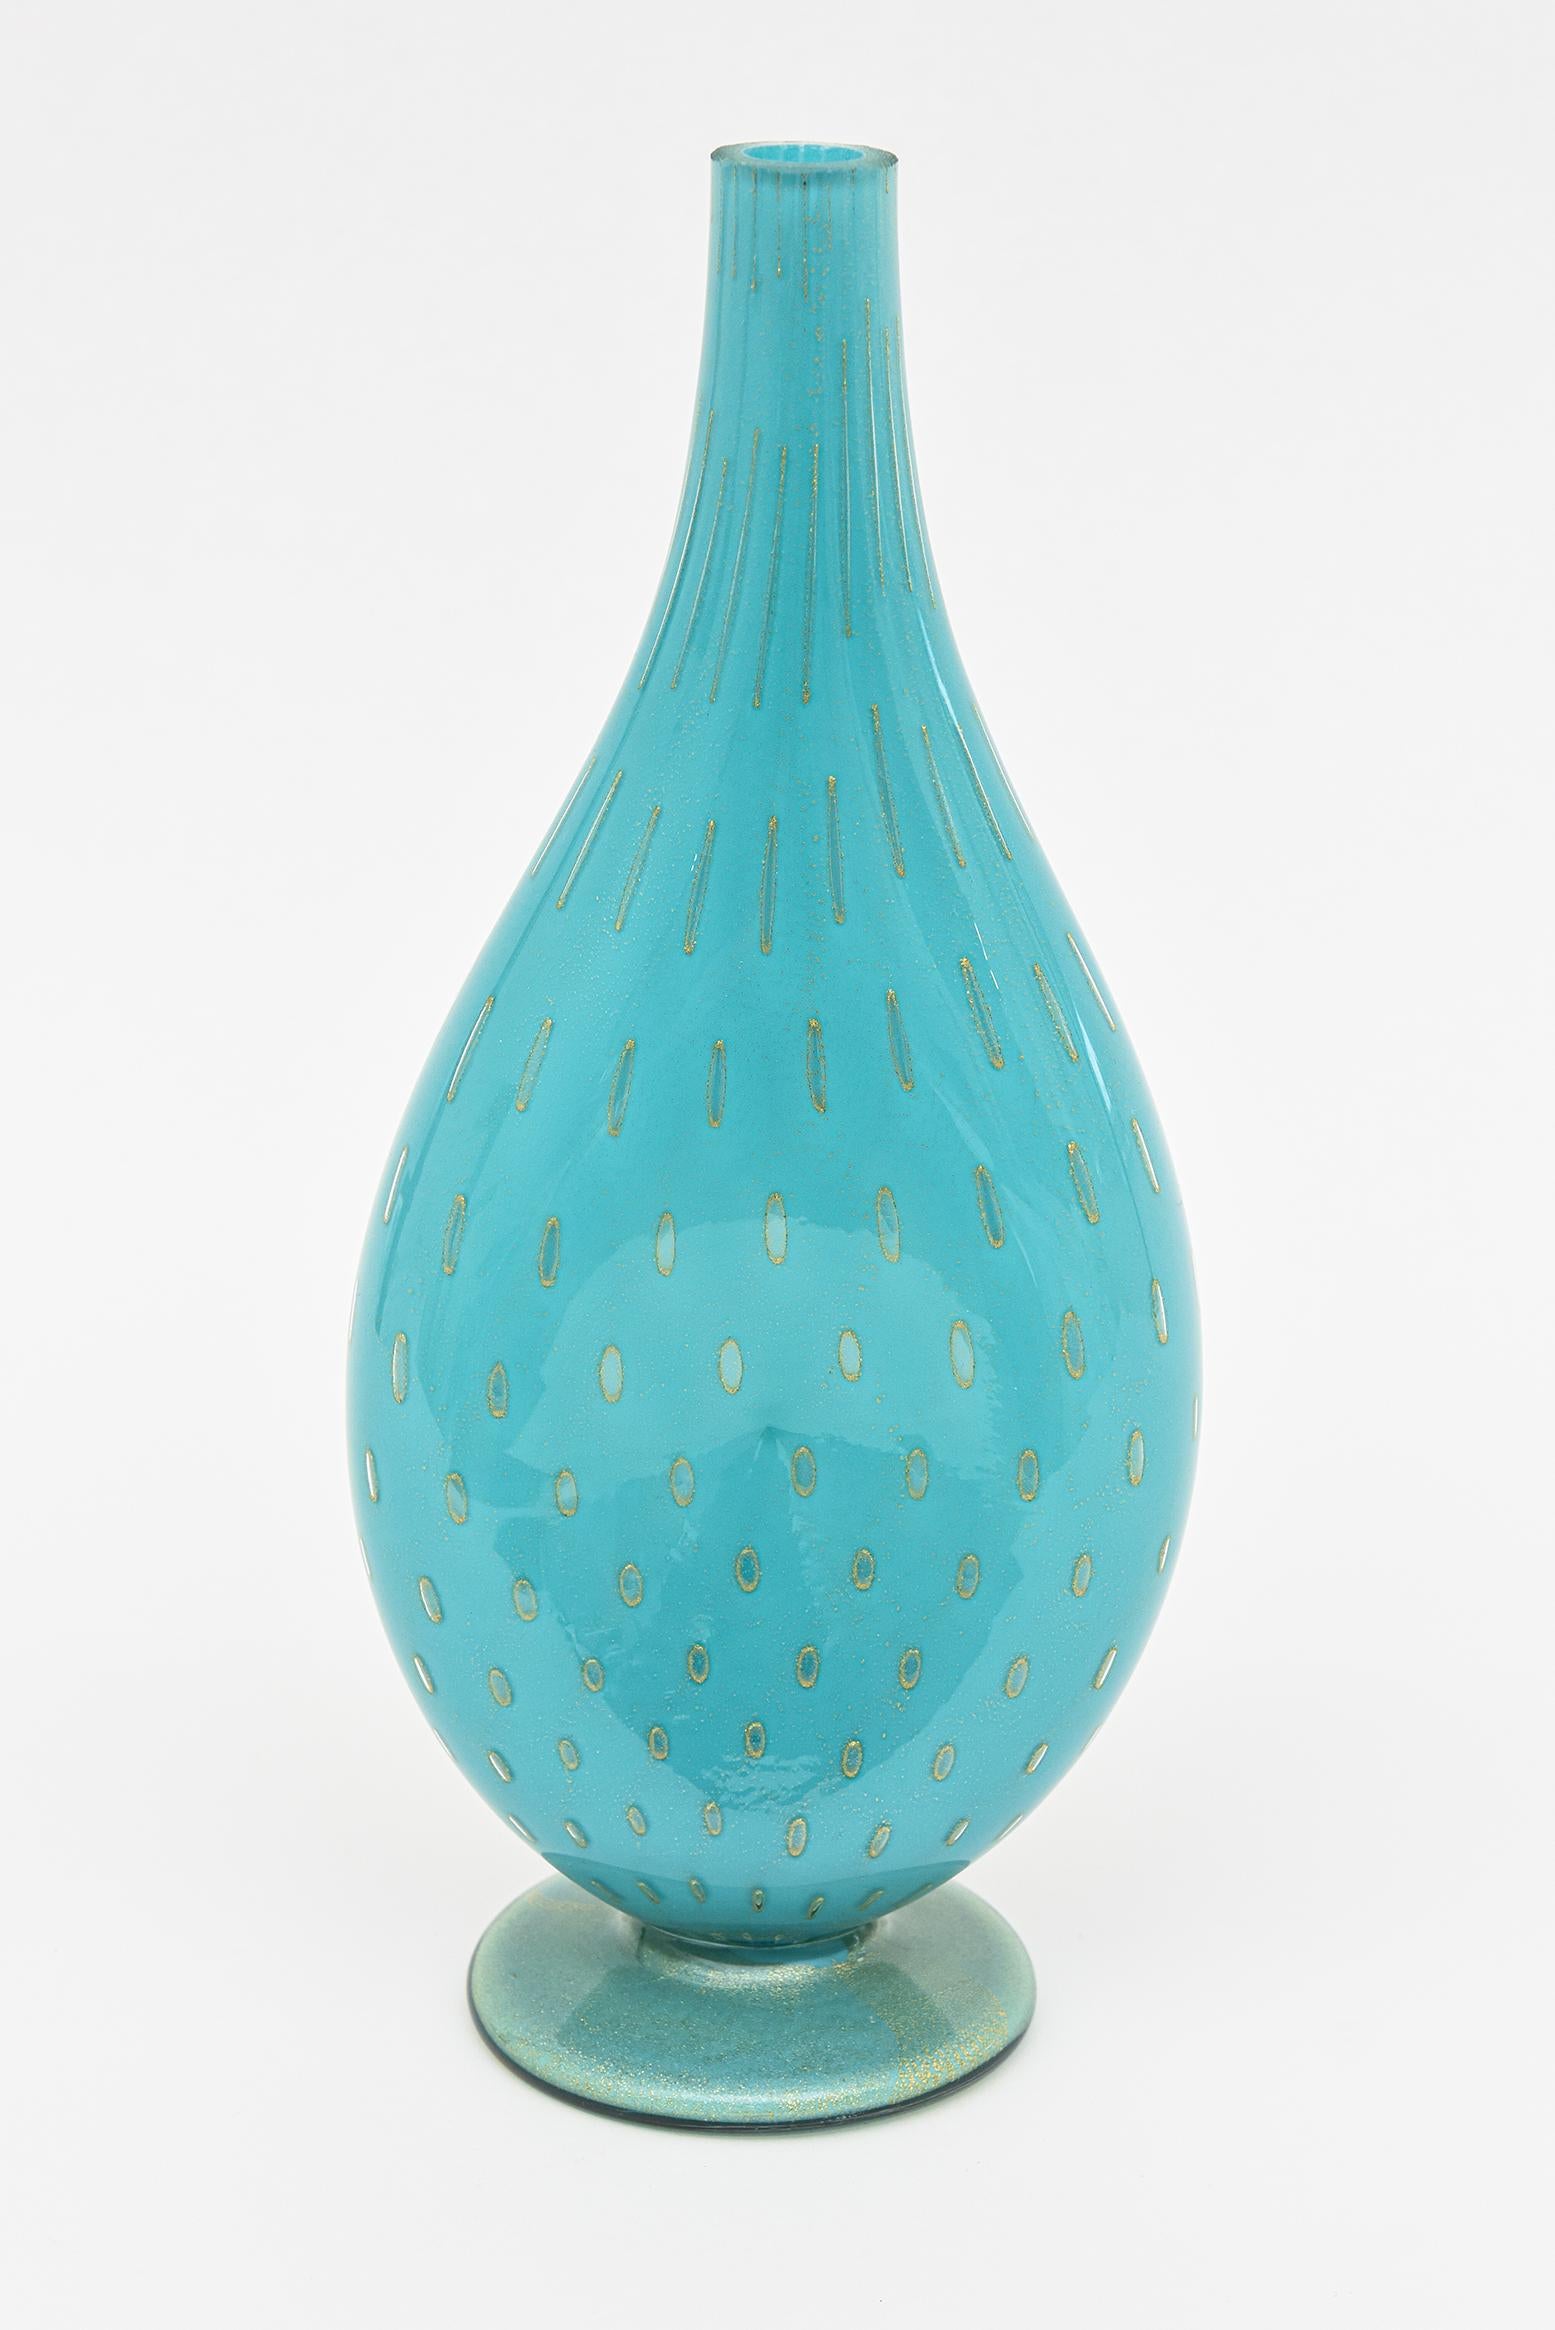 Vintage Barovier e Toso Murano Turquoise Glass Vessel Bottle With Gold Droplets For Sale 1